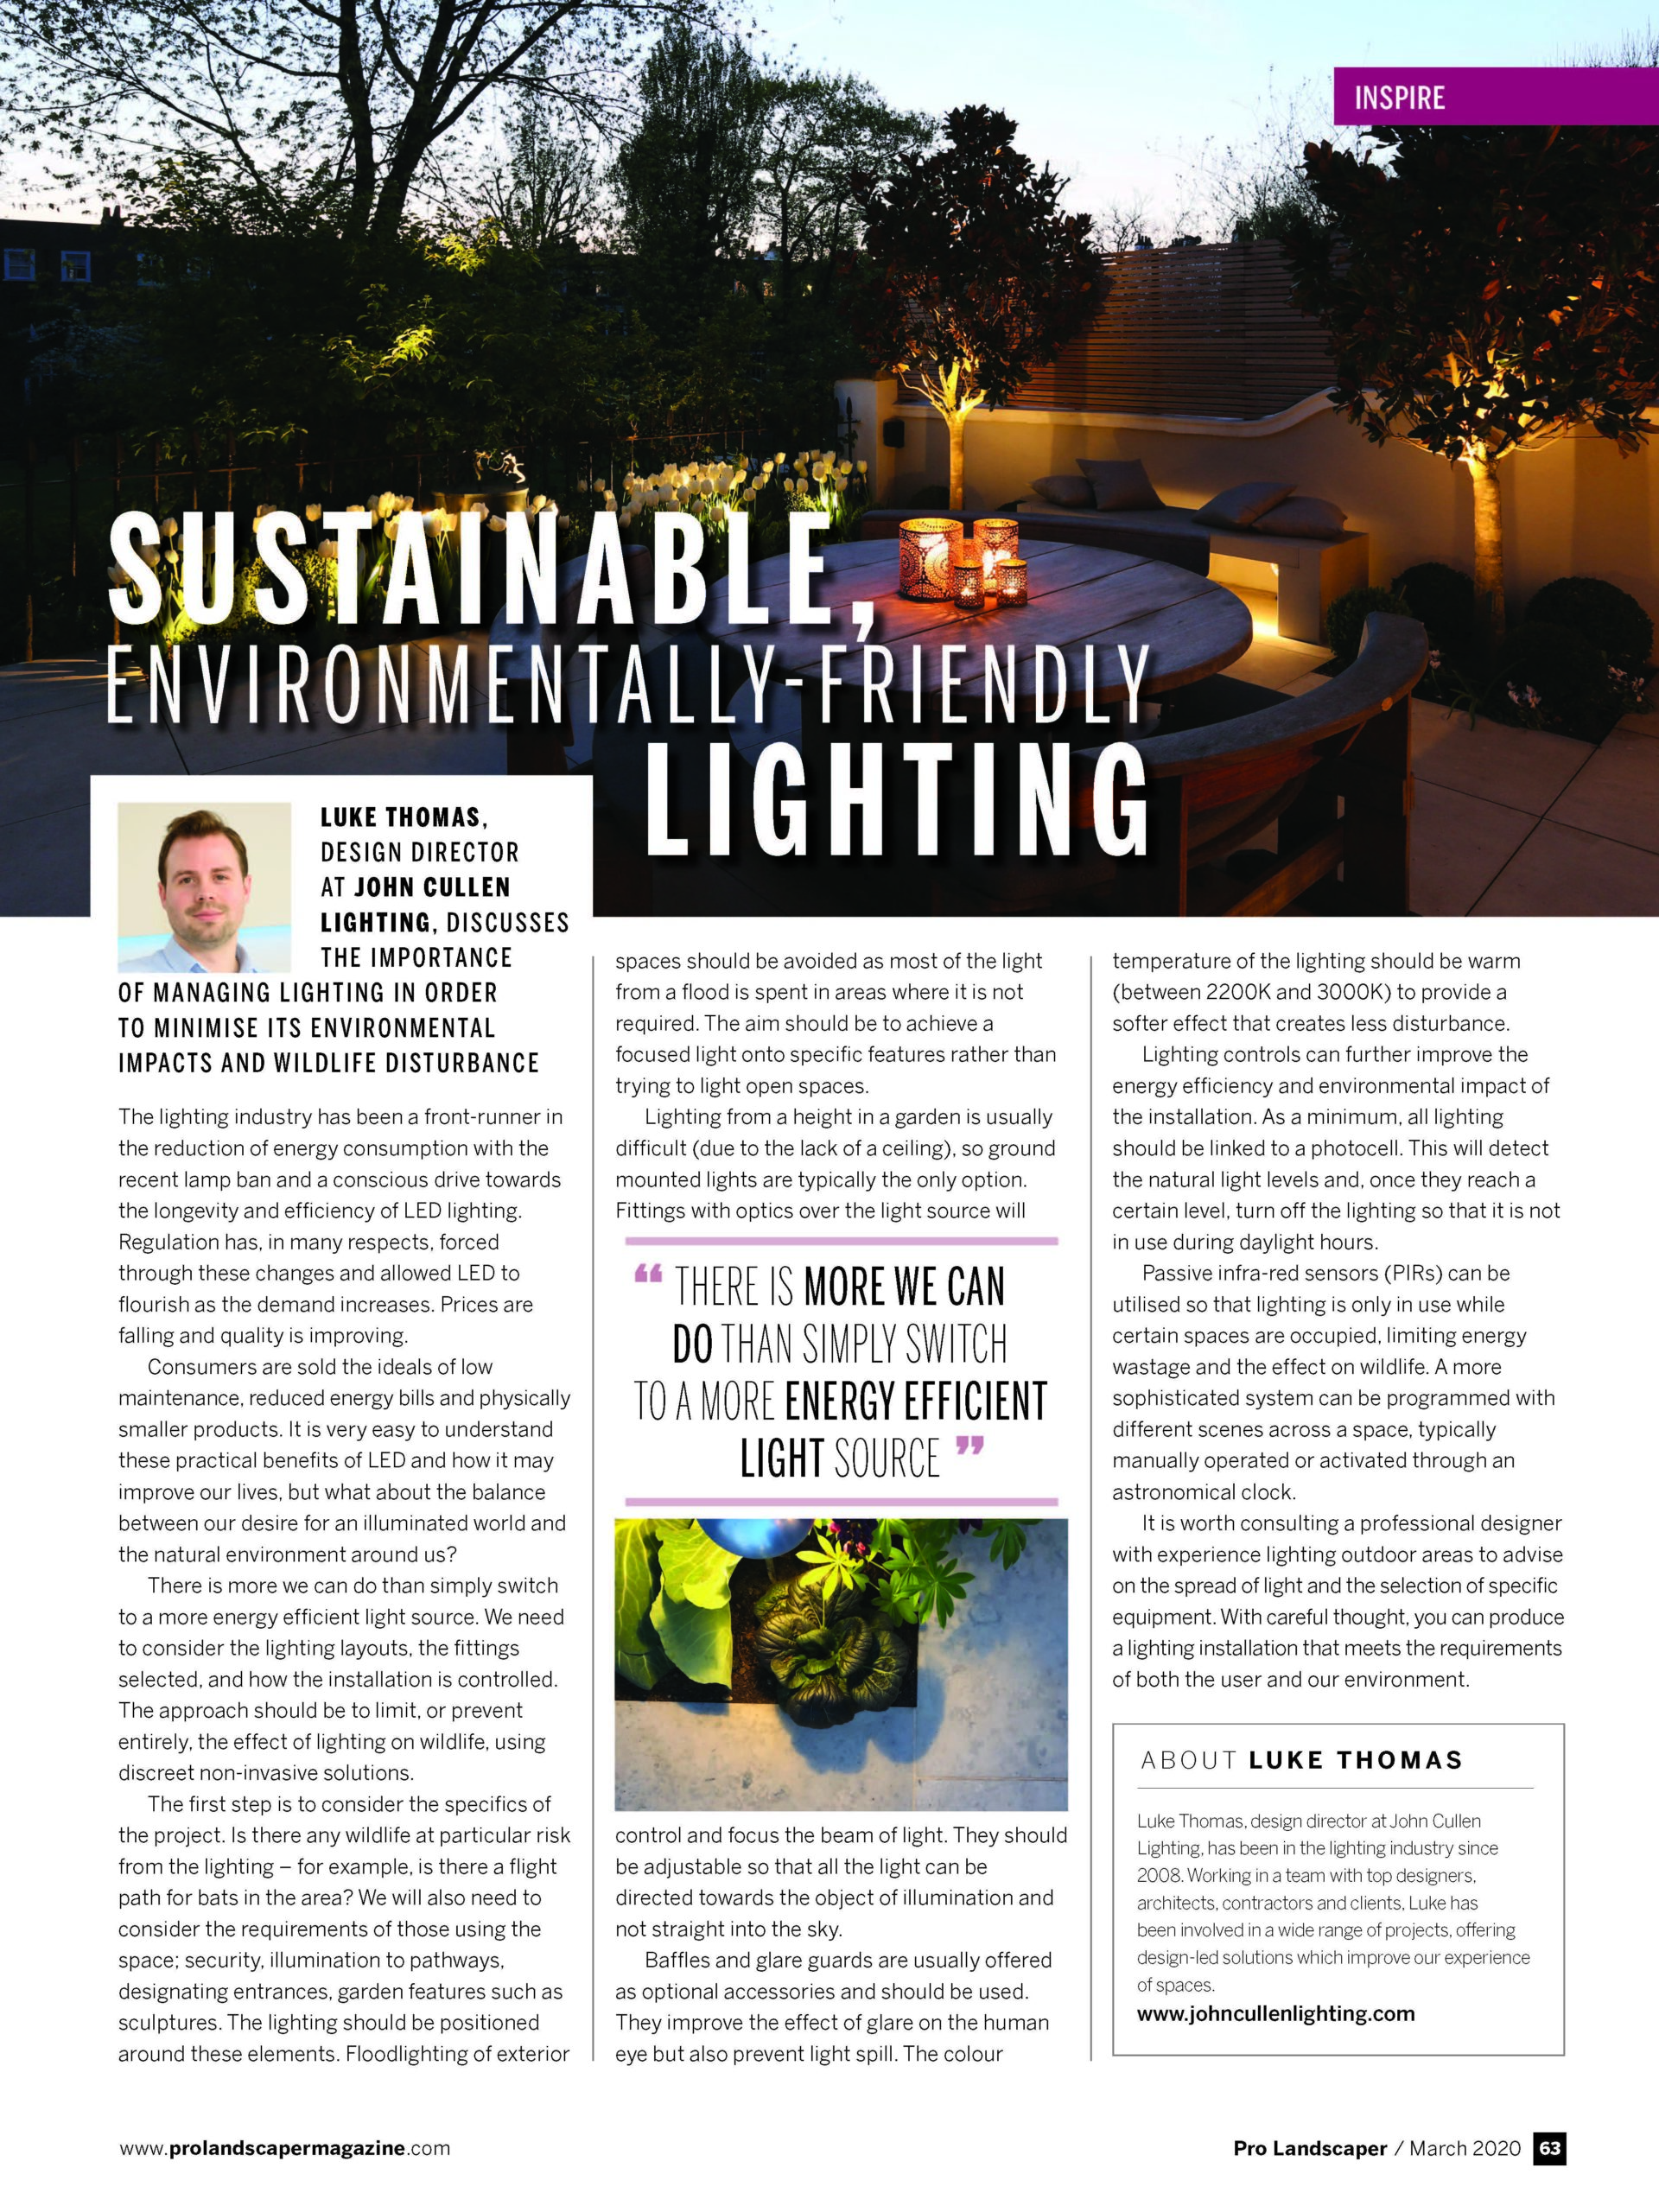 Sustainable Lighting Tips with Pro Landscaper